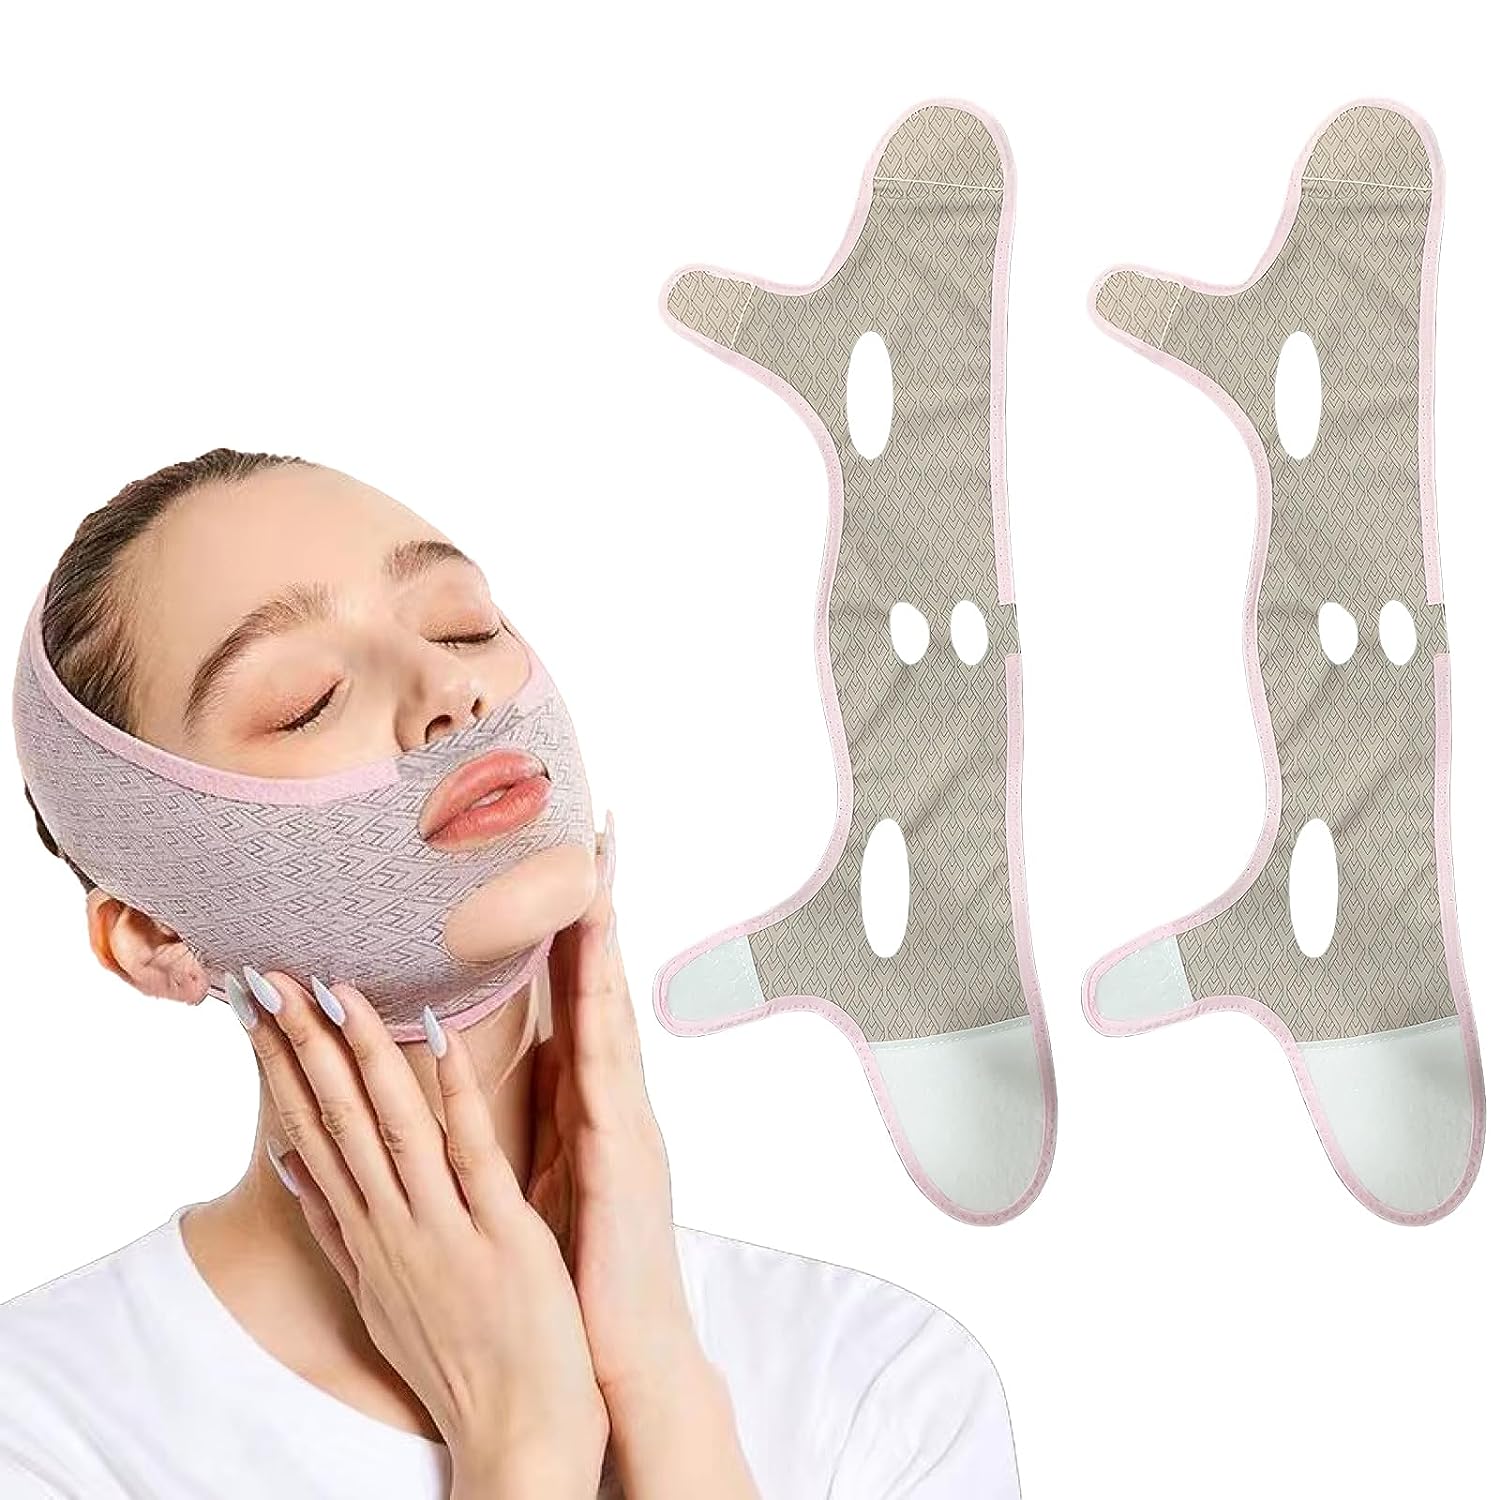 Reusable V Line Mask Sculpting Sleep Mask: Pack of 2 Double Chin Reducing Mask for Women and Men, Face Slimming Strap, Saggy Face Skin